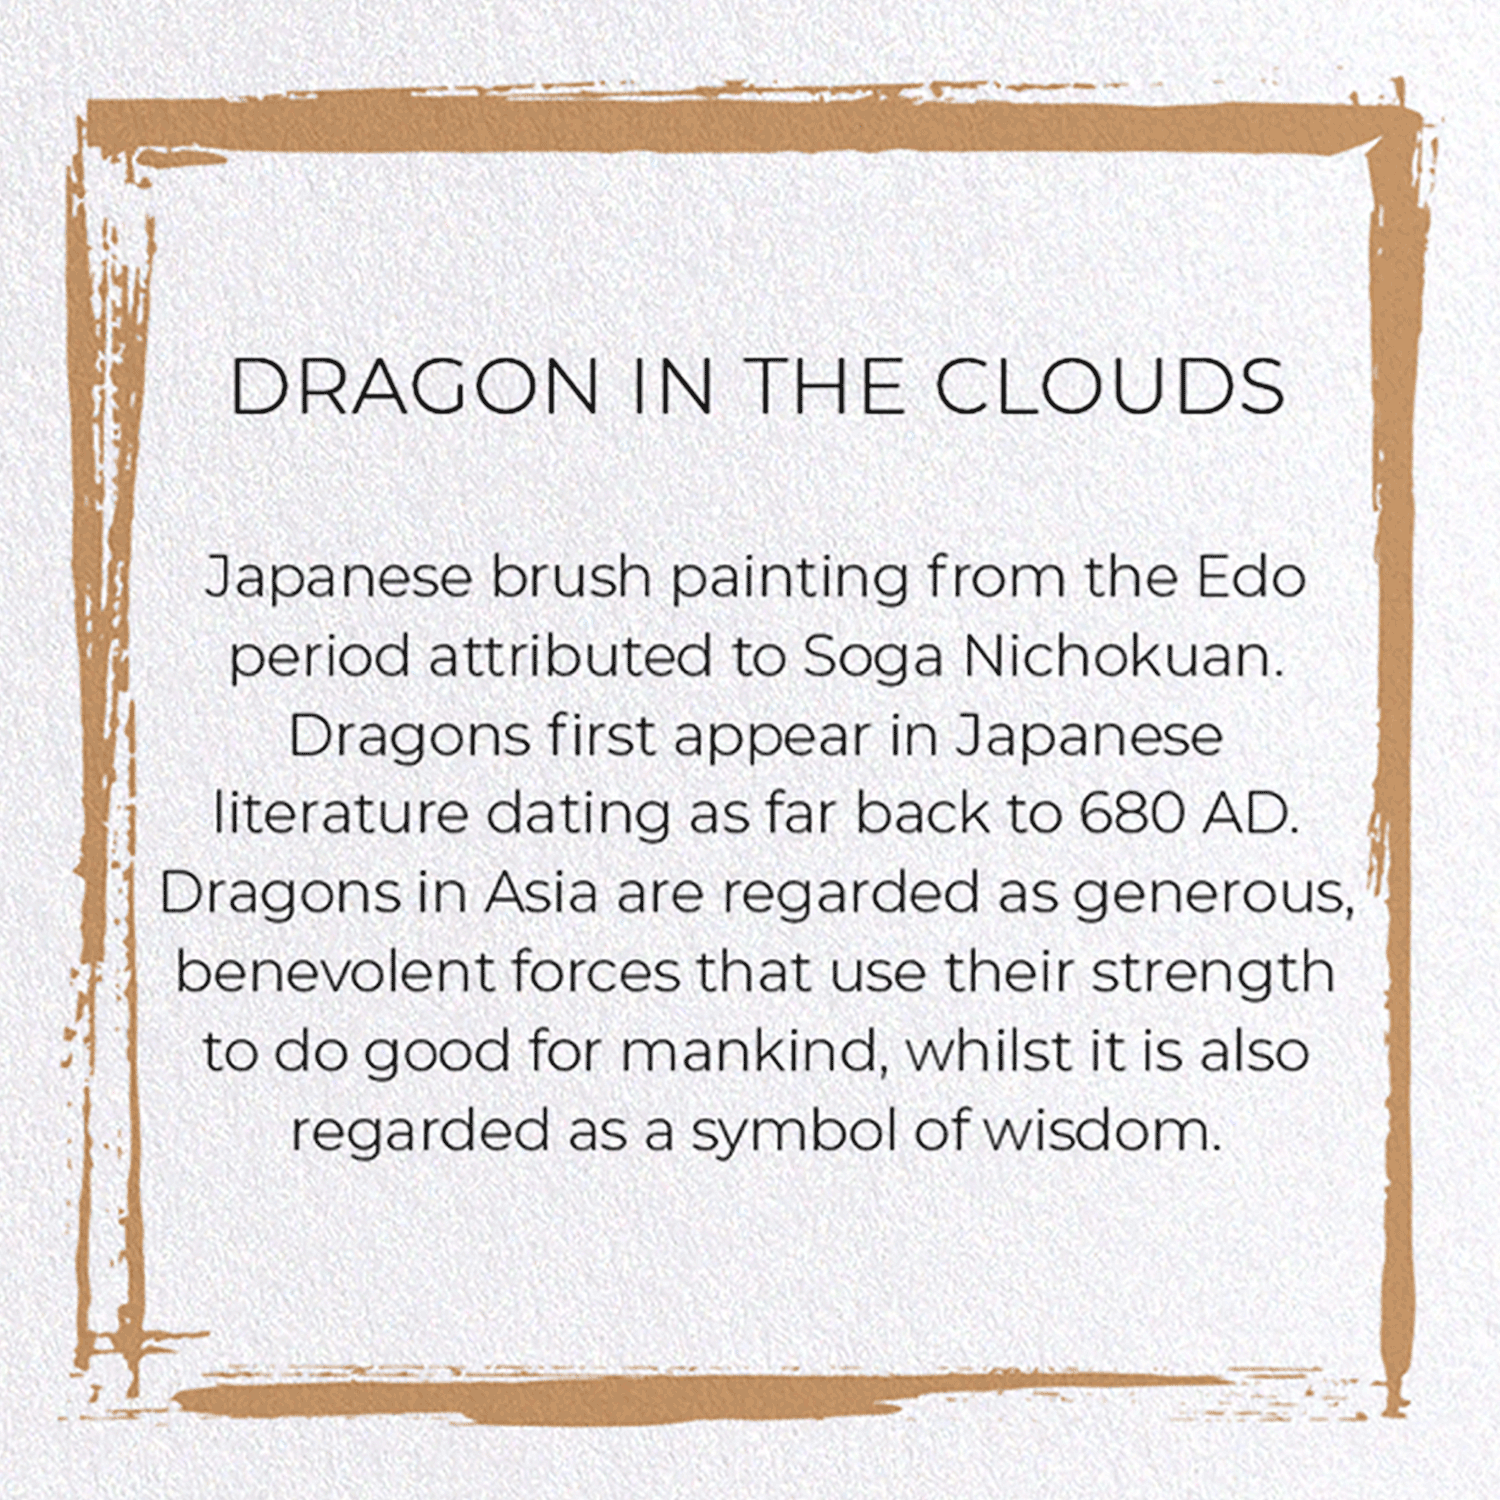 DRAGON IN THE CLOUDS